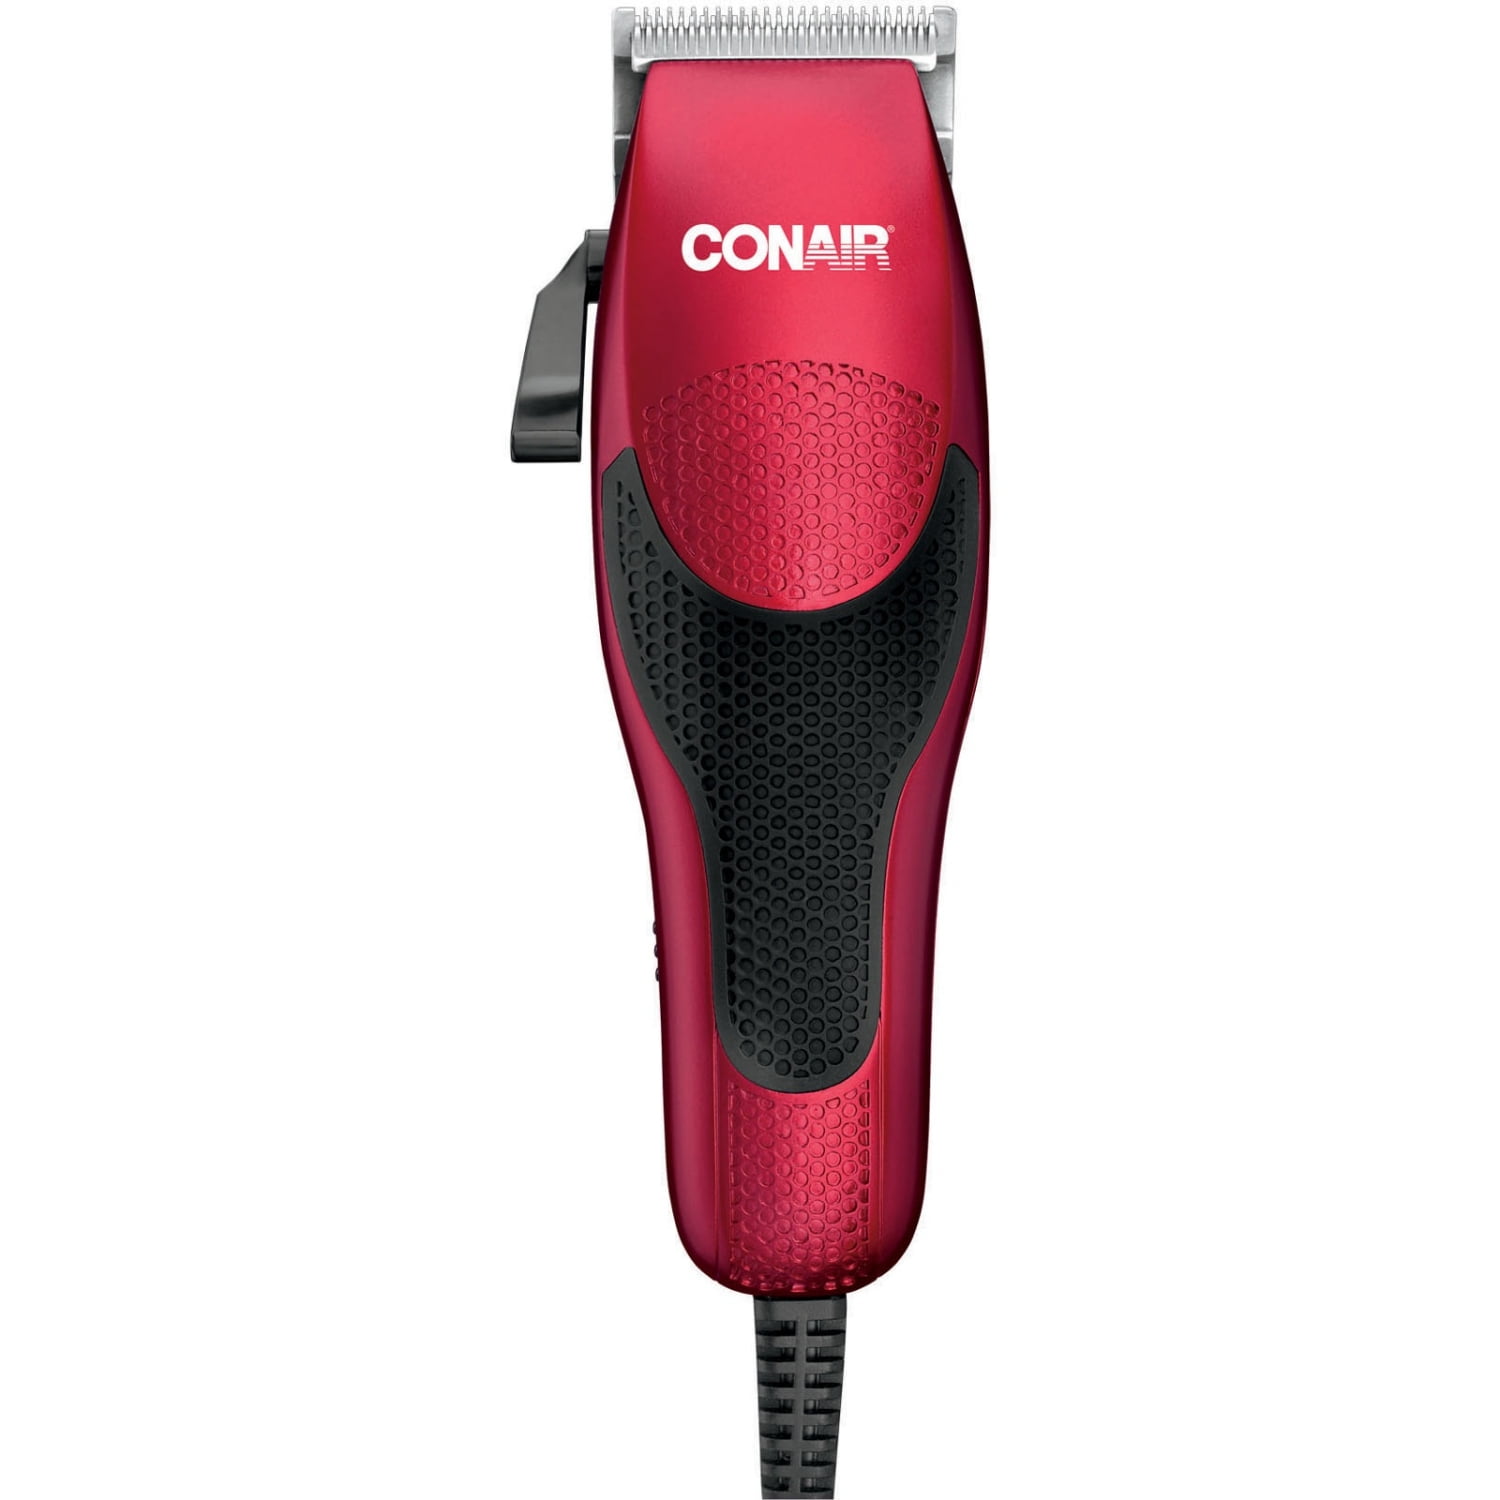 ceenwes hair clippers manual